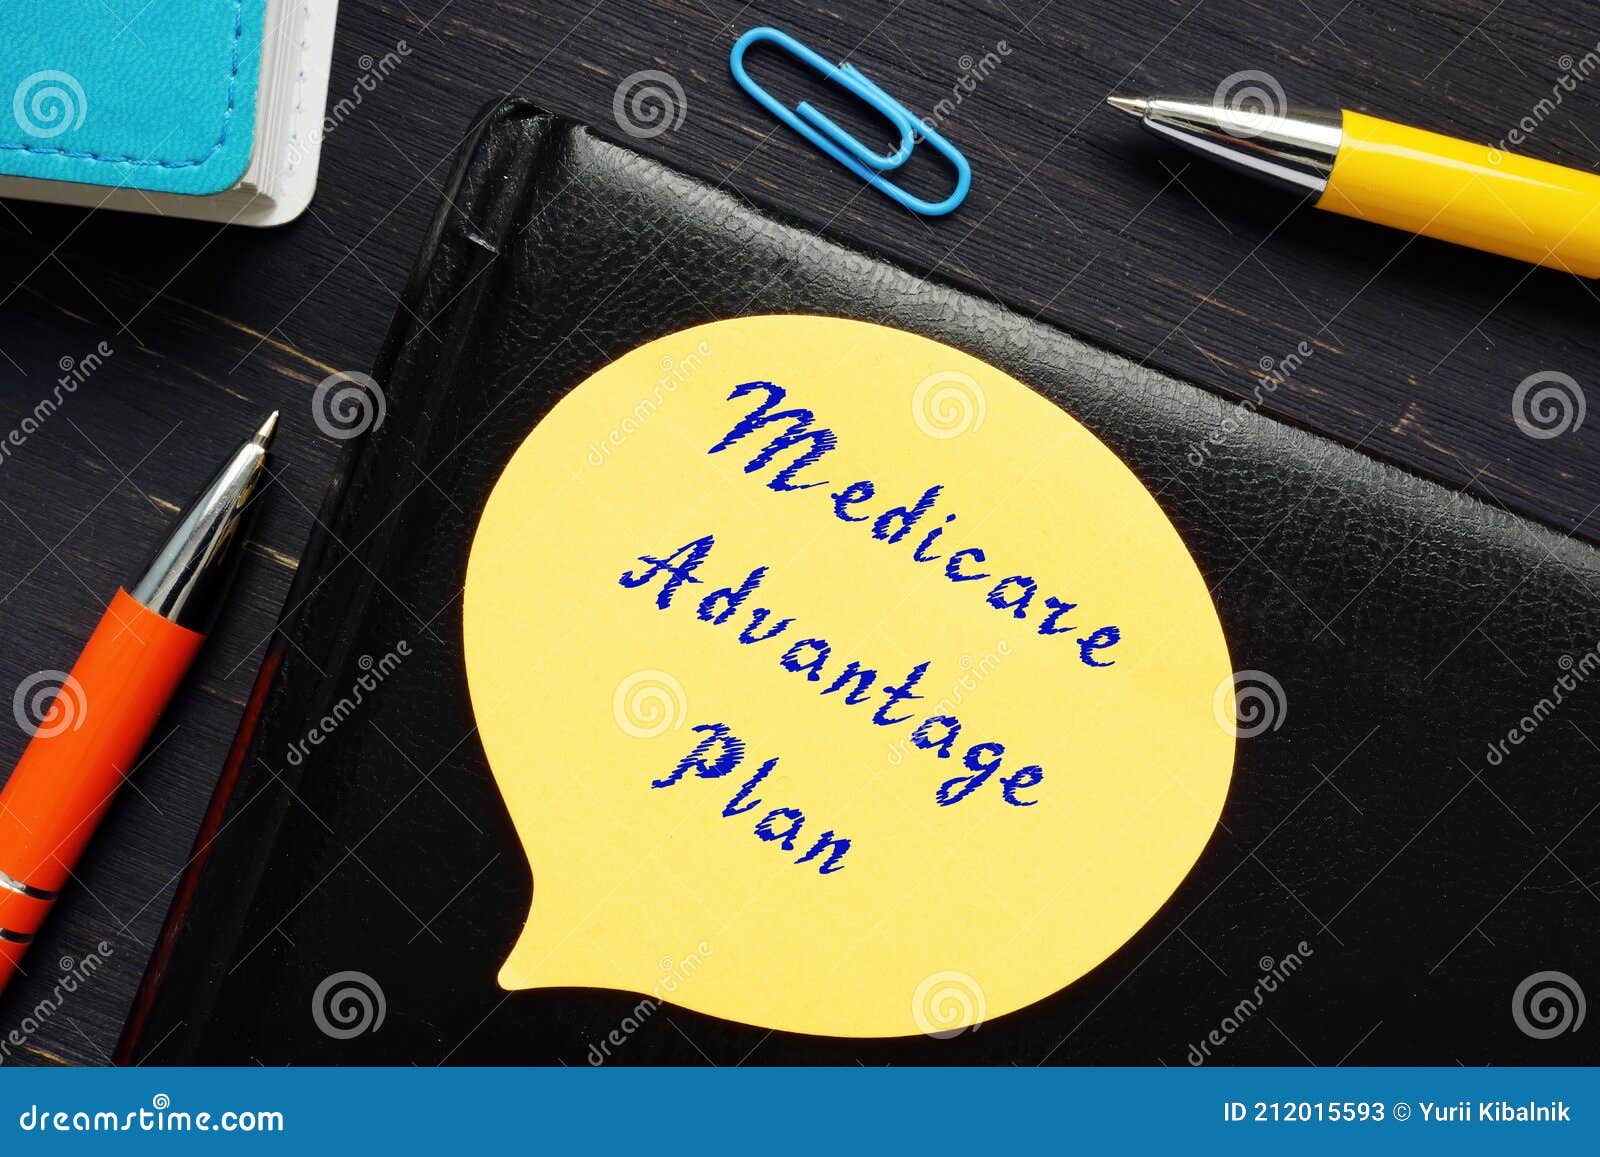 conceptual photo about medicare advantage plan with written text